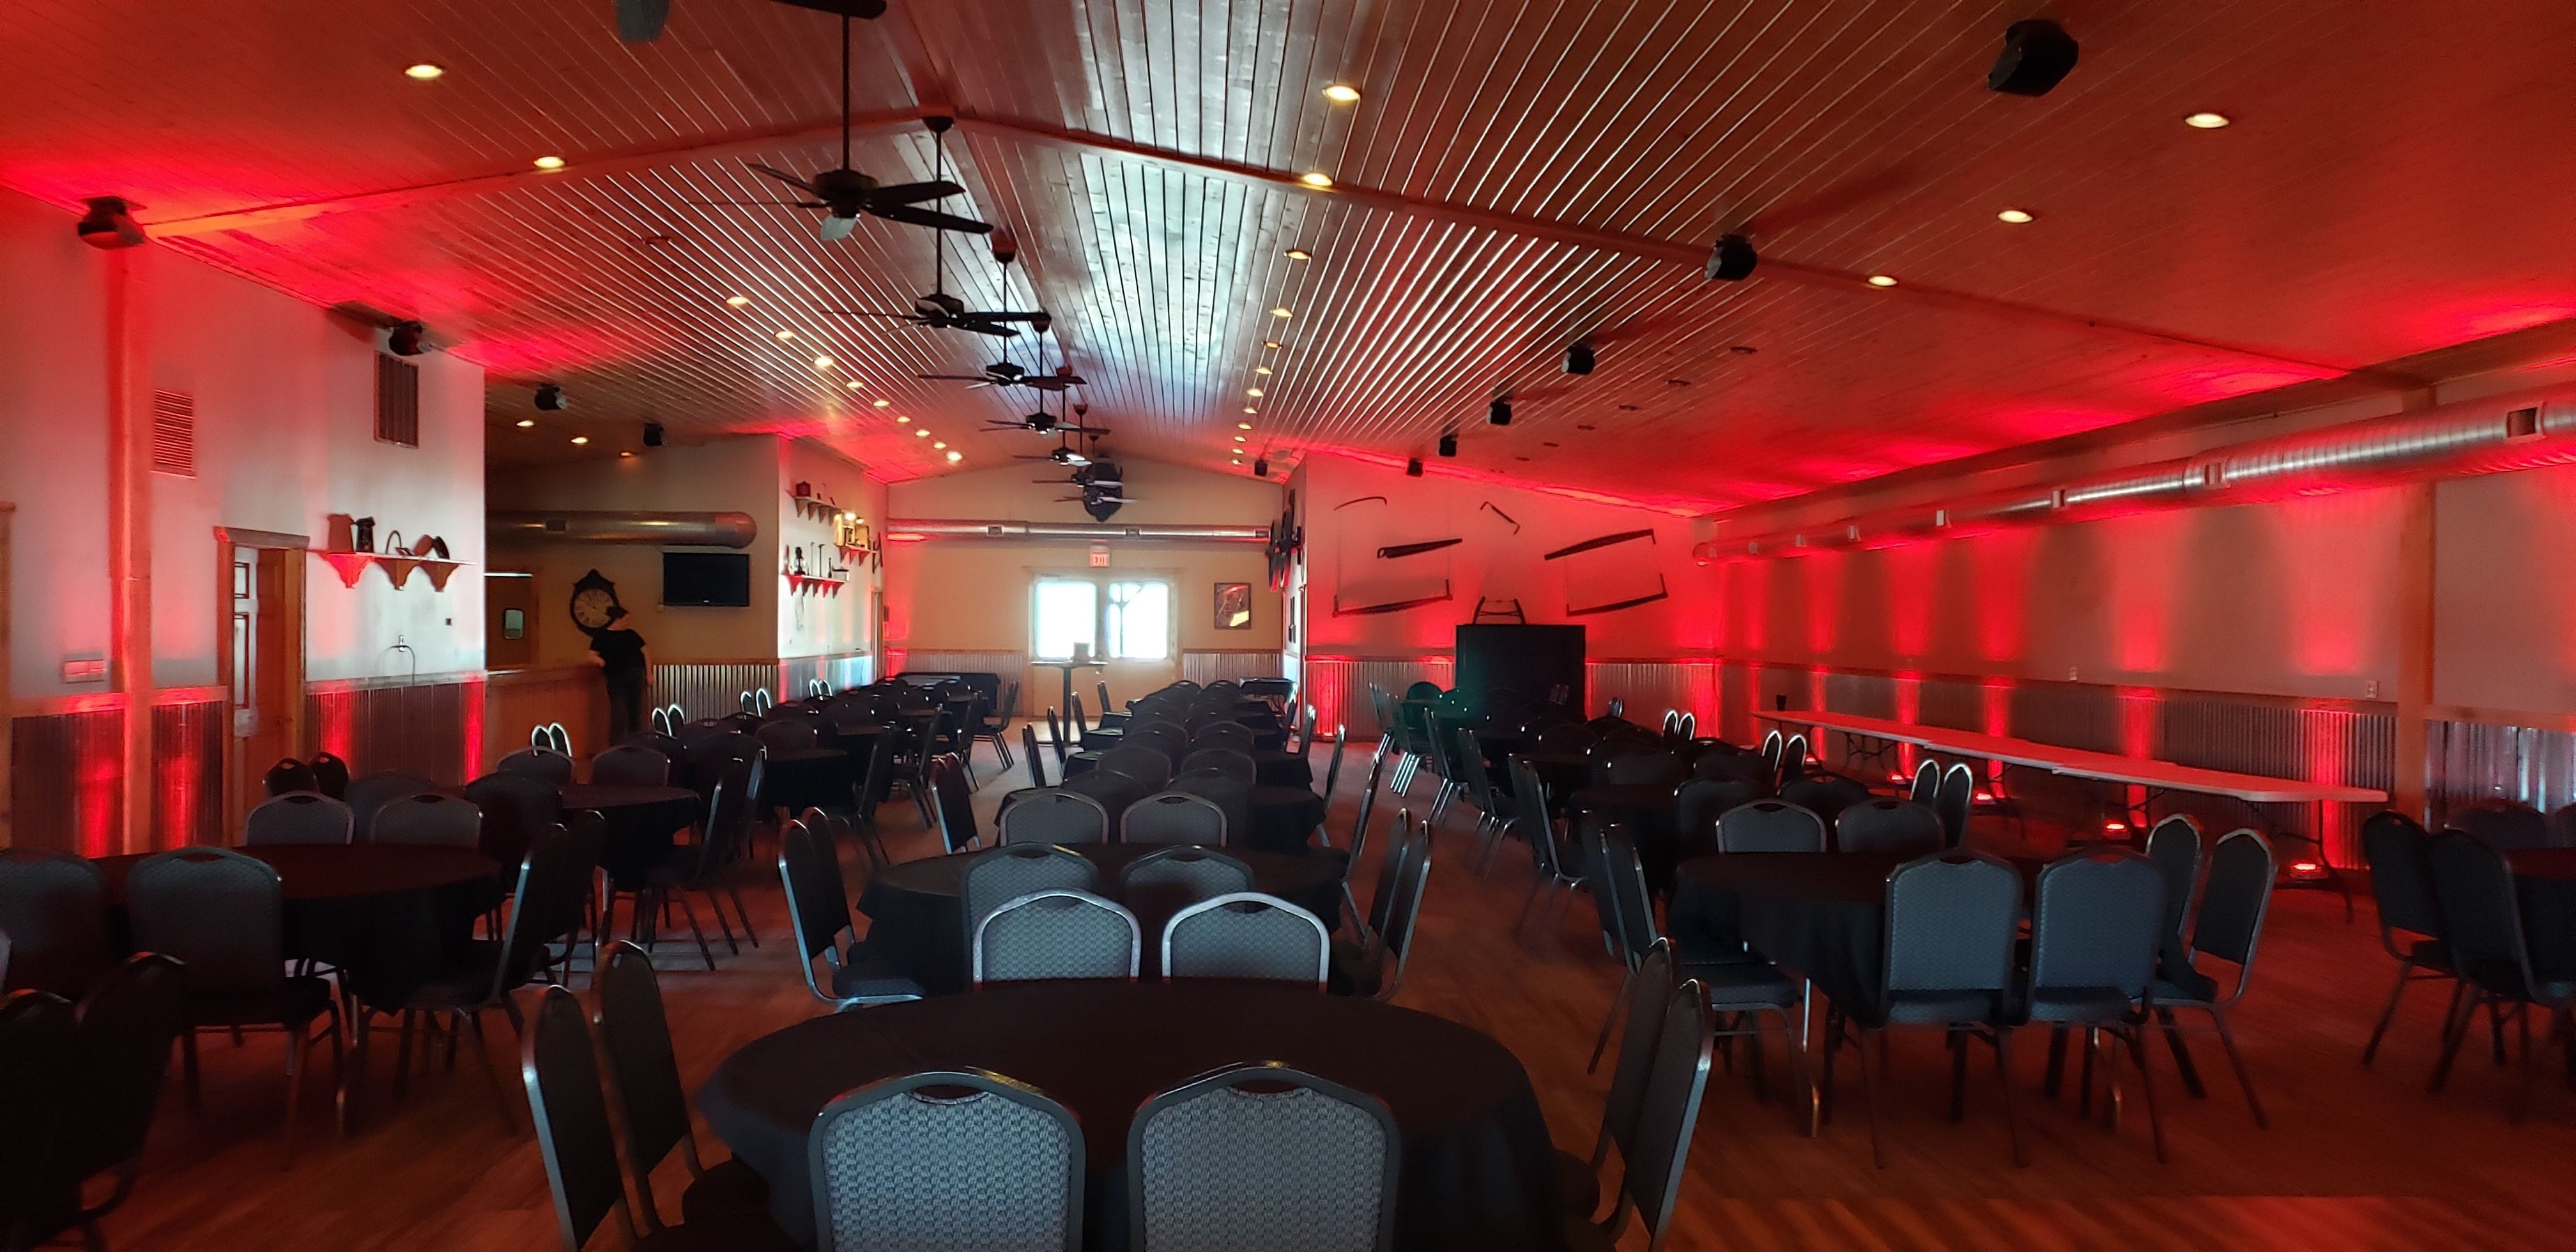 Up lighting in red at the Buffalo House for a wedding